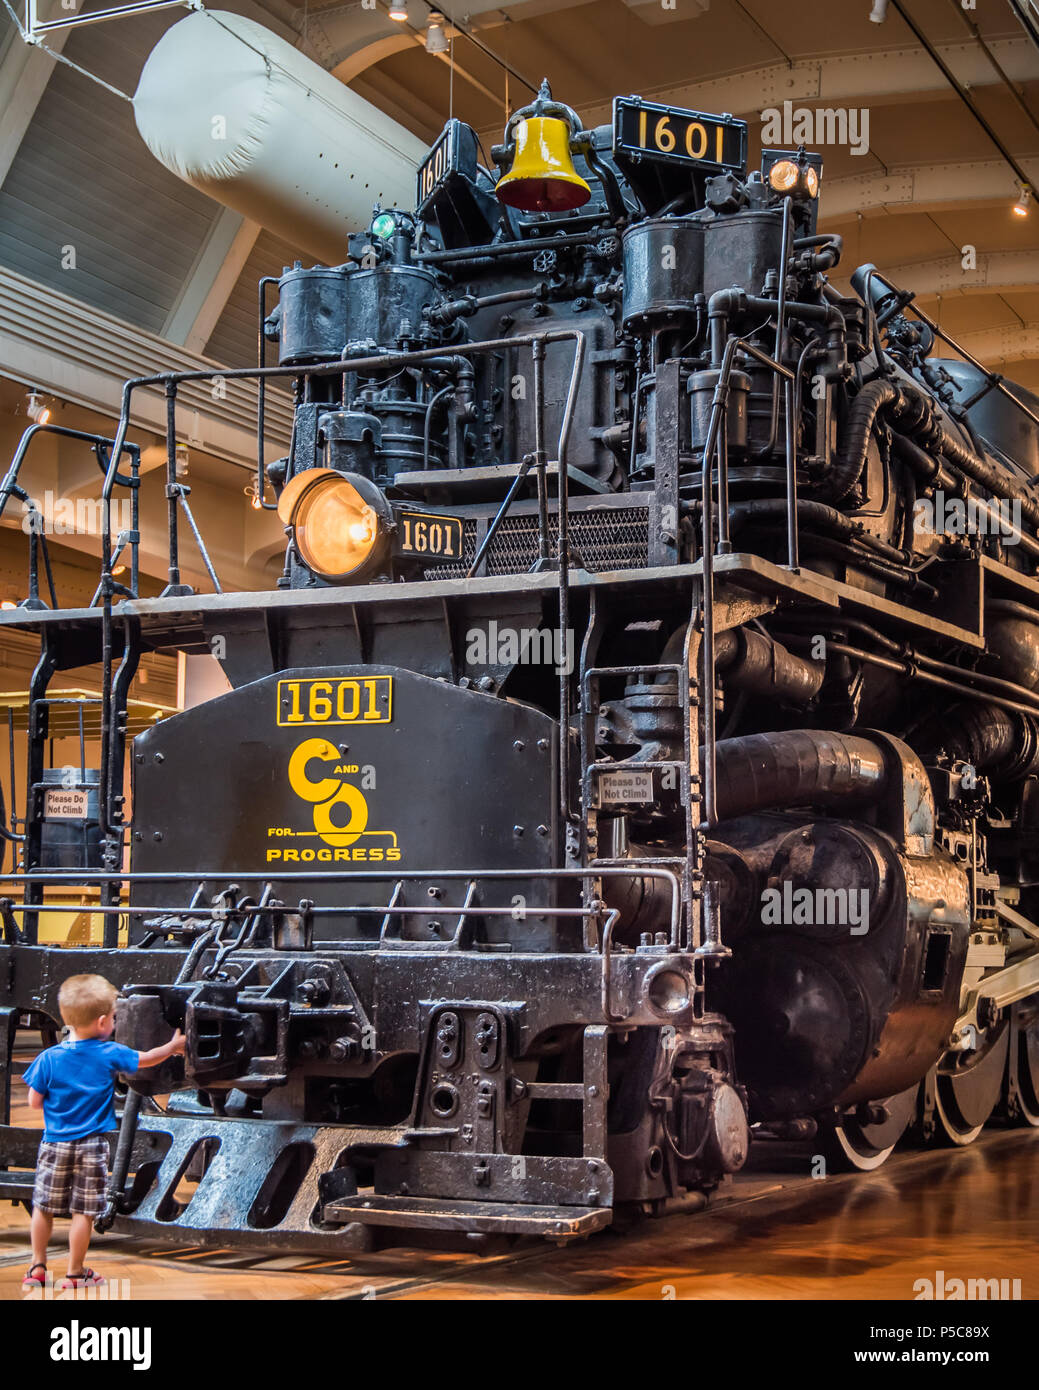 DEARBORN, MI/USA - JUNE 16, 2018: A 1941 Chesapeake & Ohio Railway Allegheny locomotive in the Driving America exhibit at The Henry Ford (THF). Stock Photo